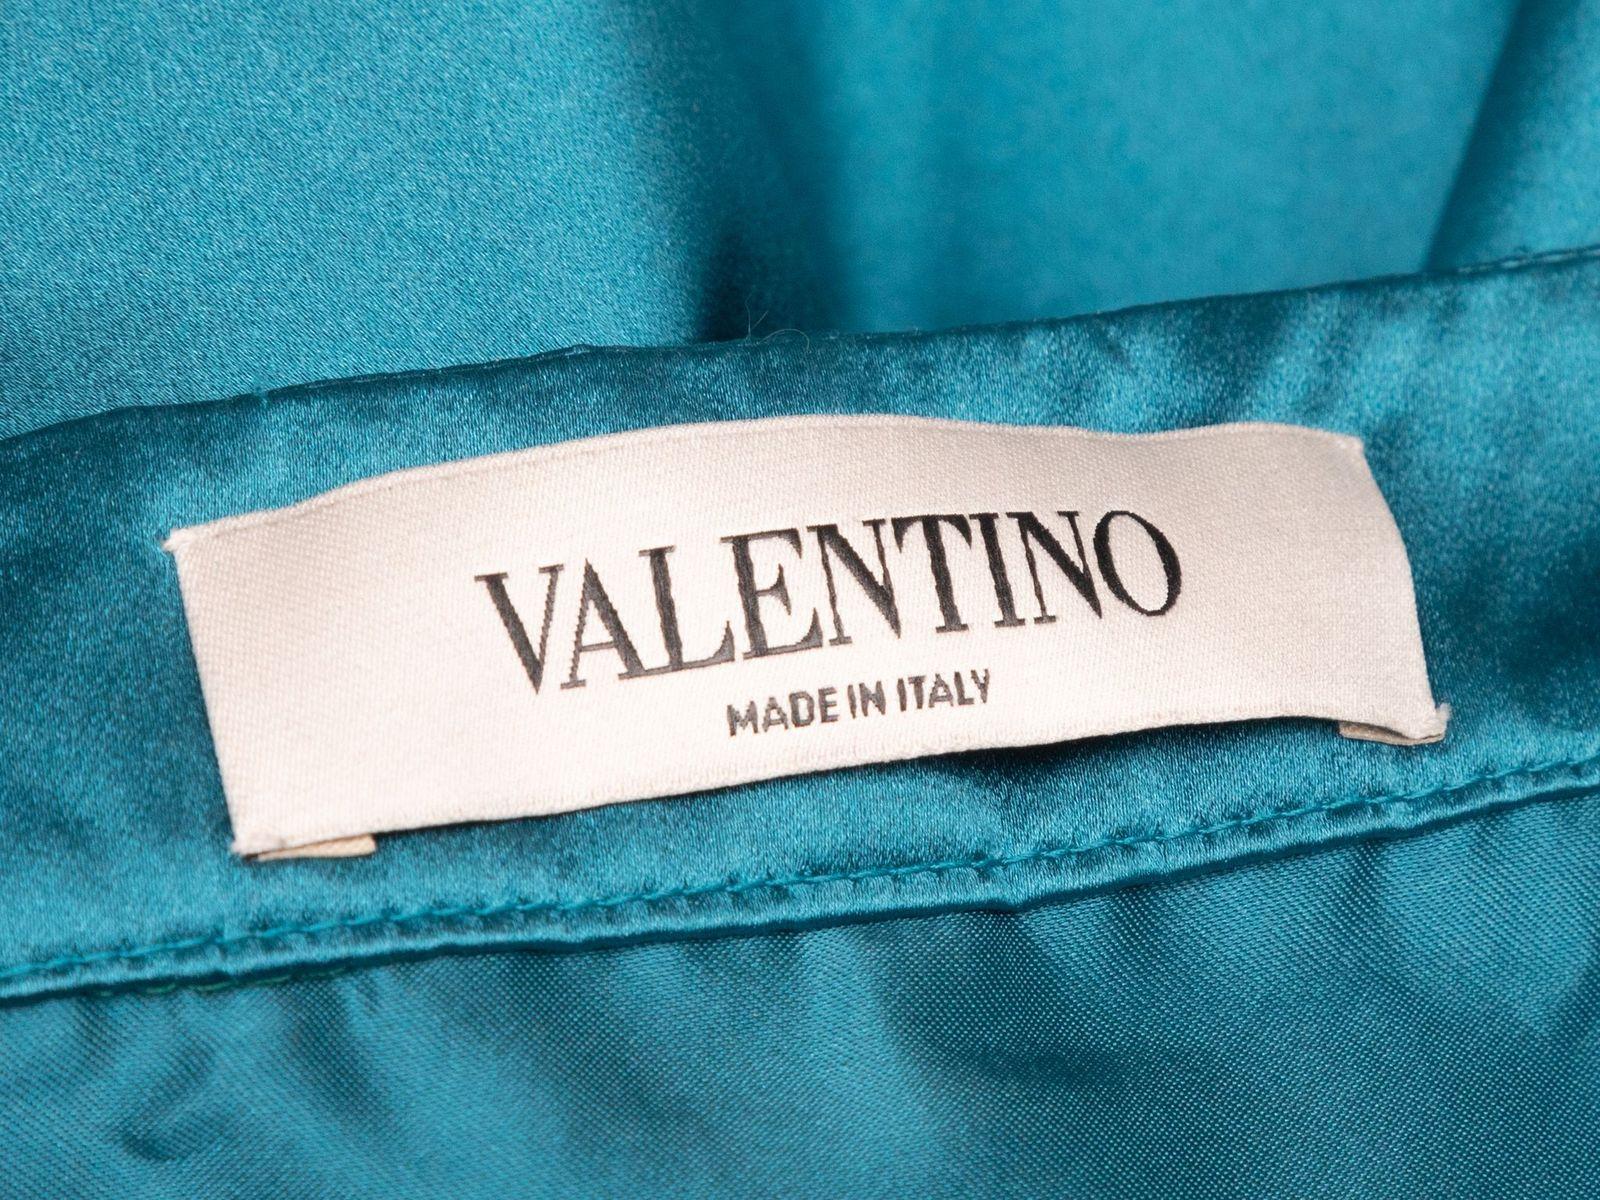 roduct Details: Teal silk maxi skirt by Valentino. Slit at side. 31